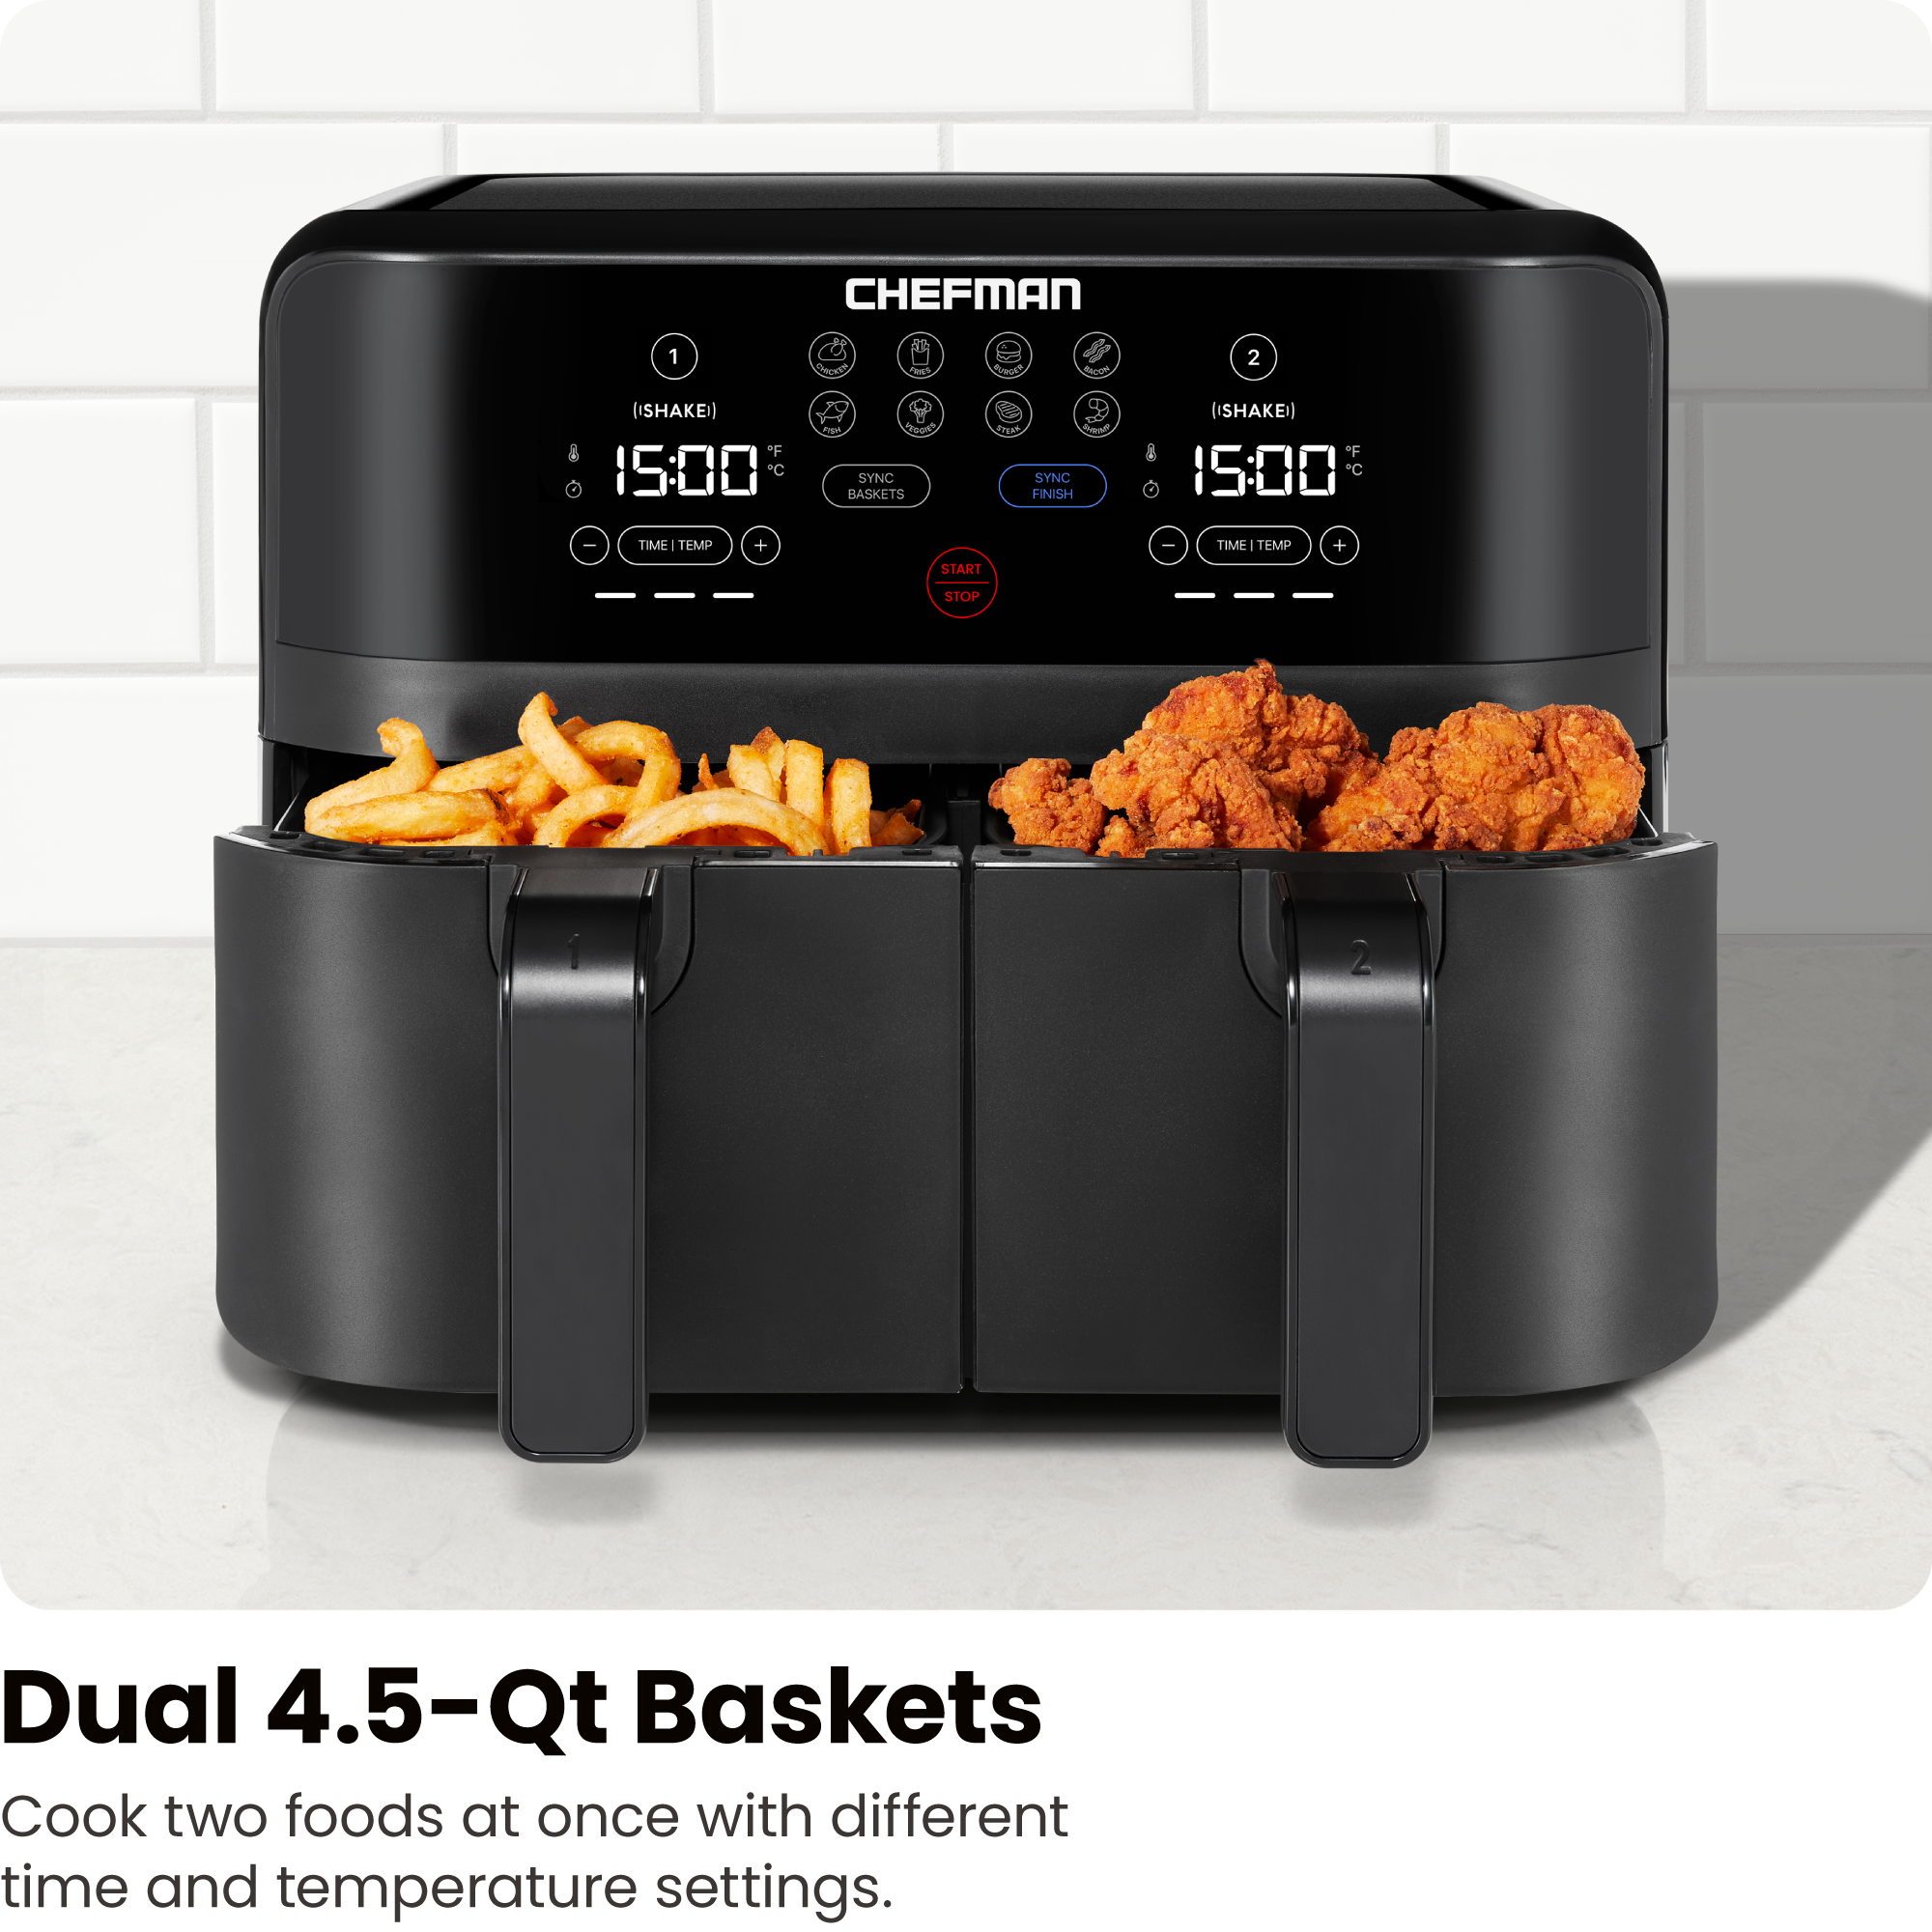 Chefman Turbofry Dual Basket Air Fryer w/ Digital Touch Display, 9 Qt Capacity - Black, New - image 4 of 8